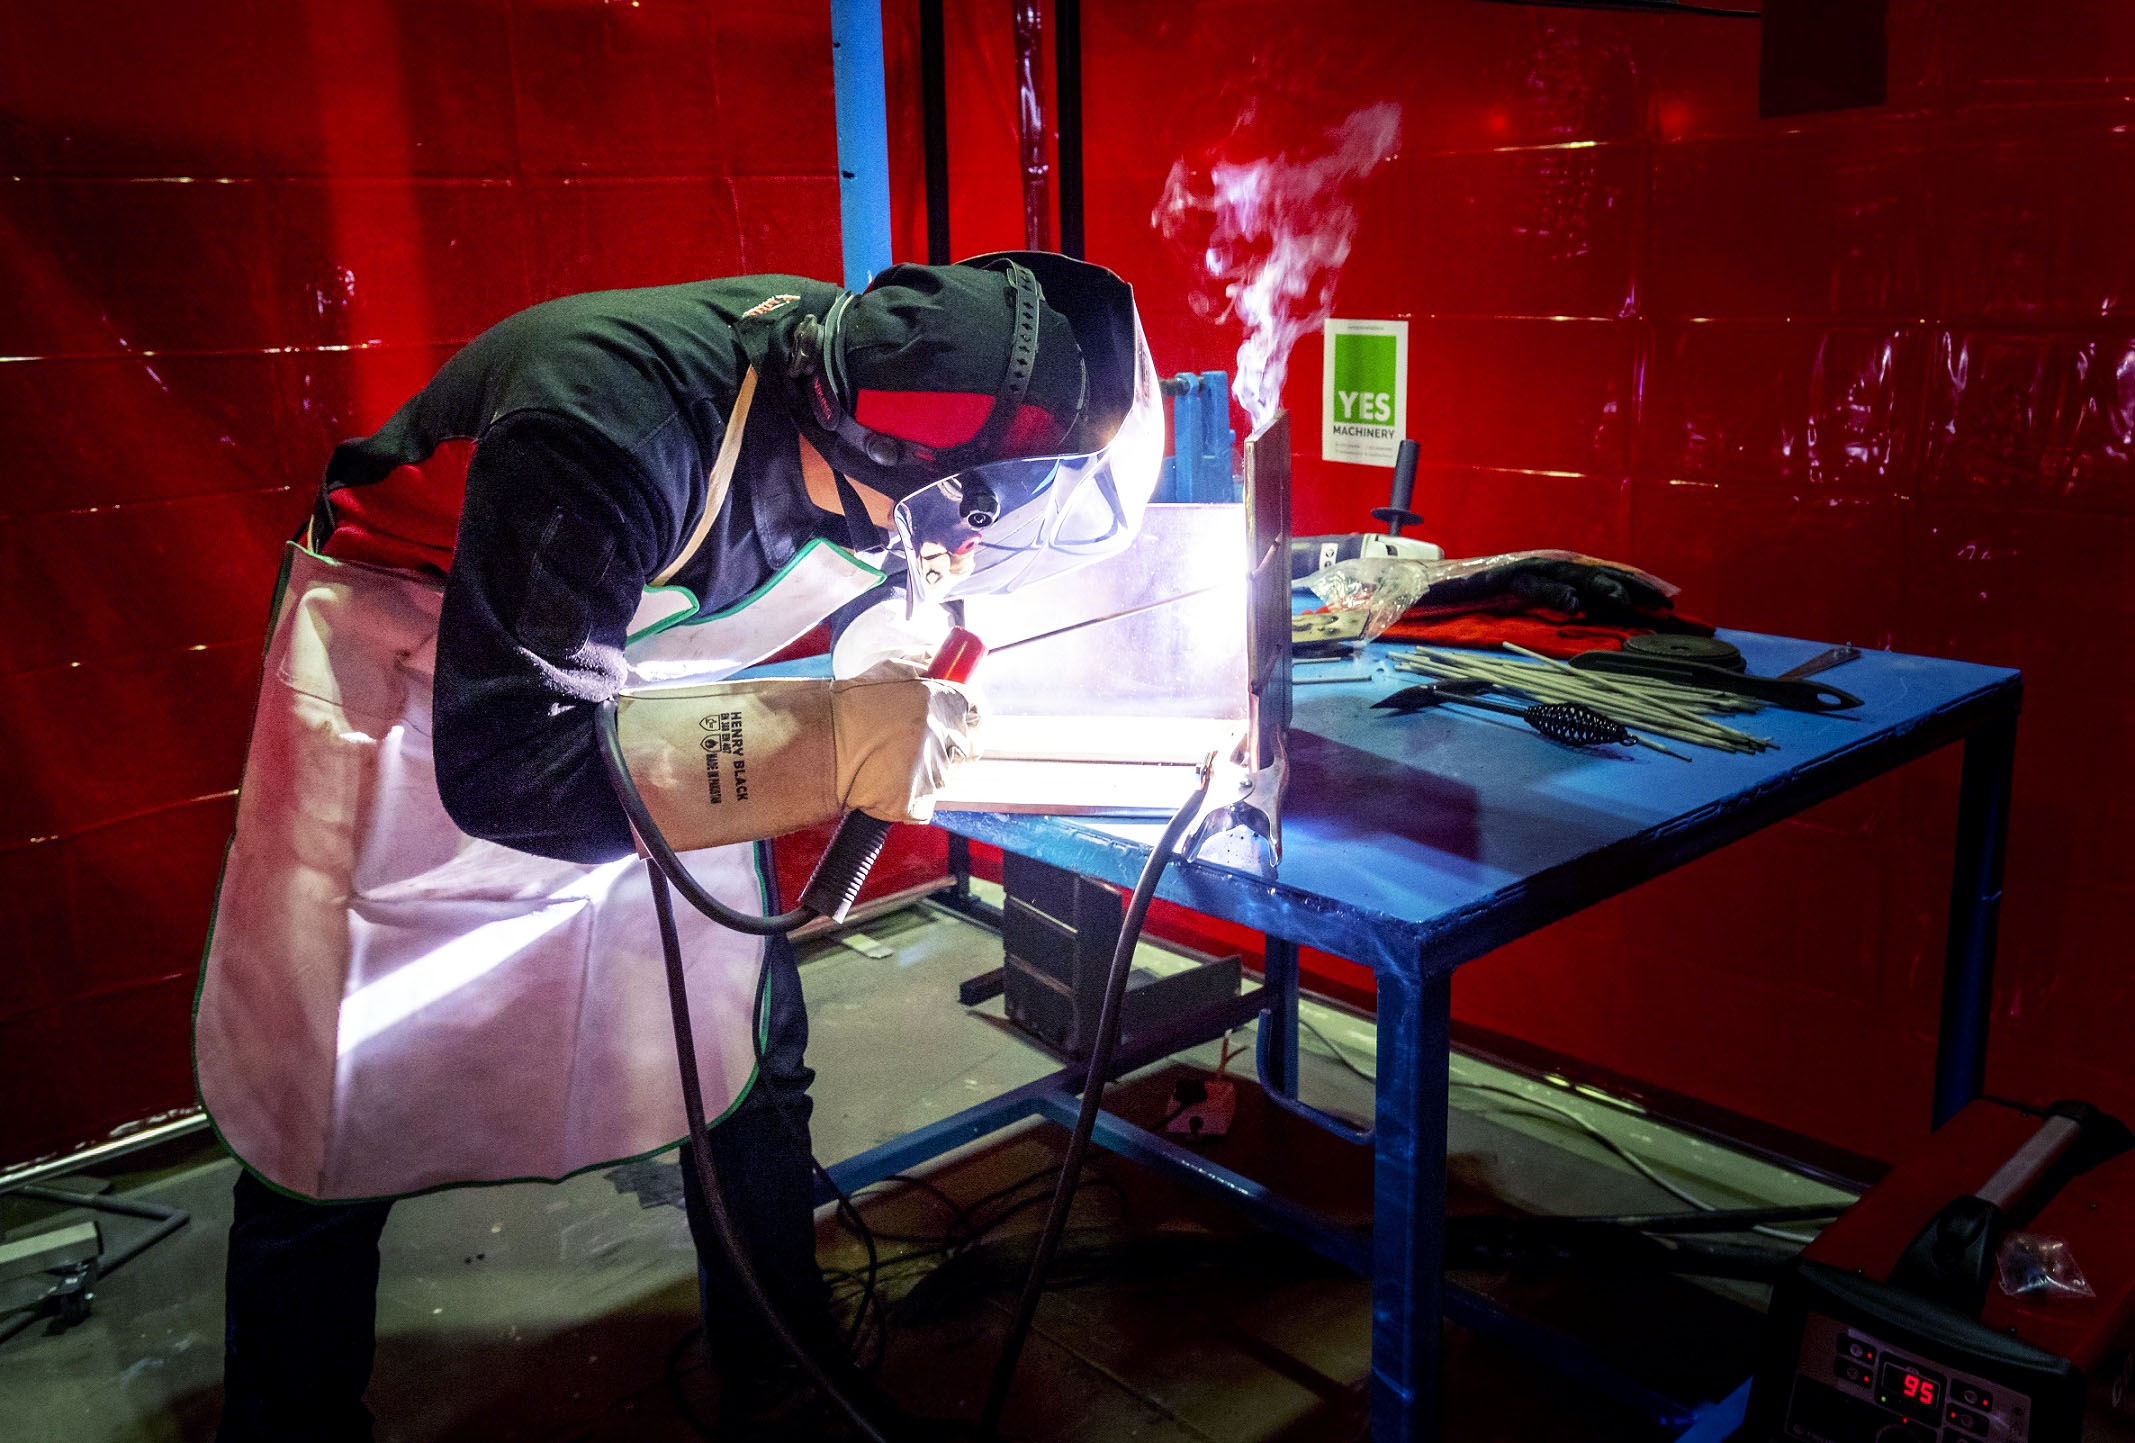 Contestants weld to glory in the first round of Middle East's Best Welder Competition at Hardware + Tools Middle East